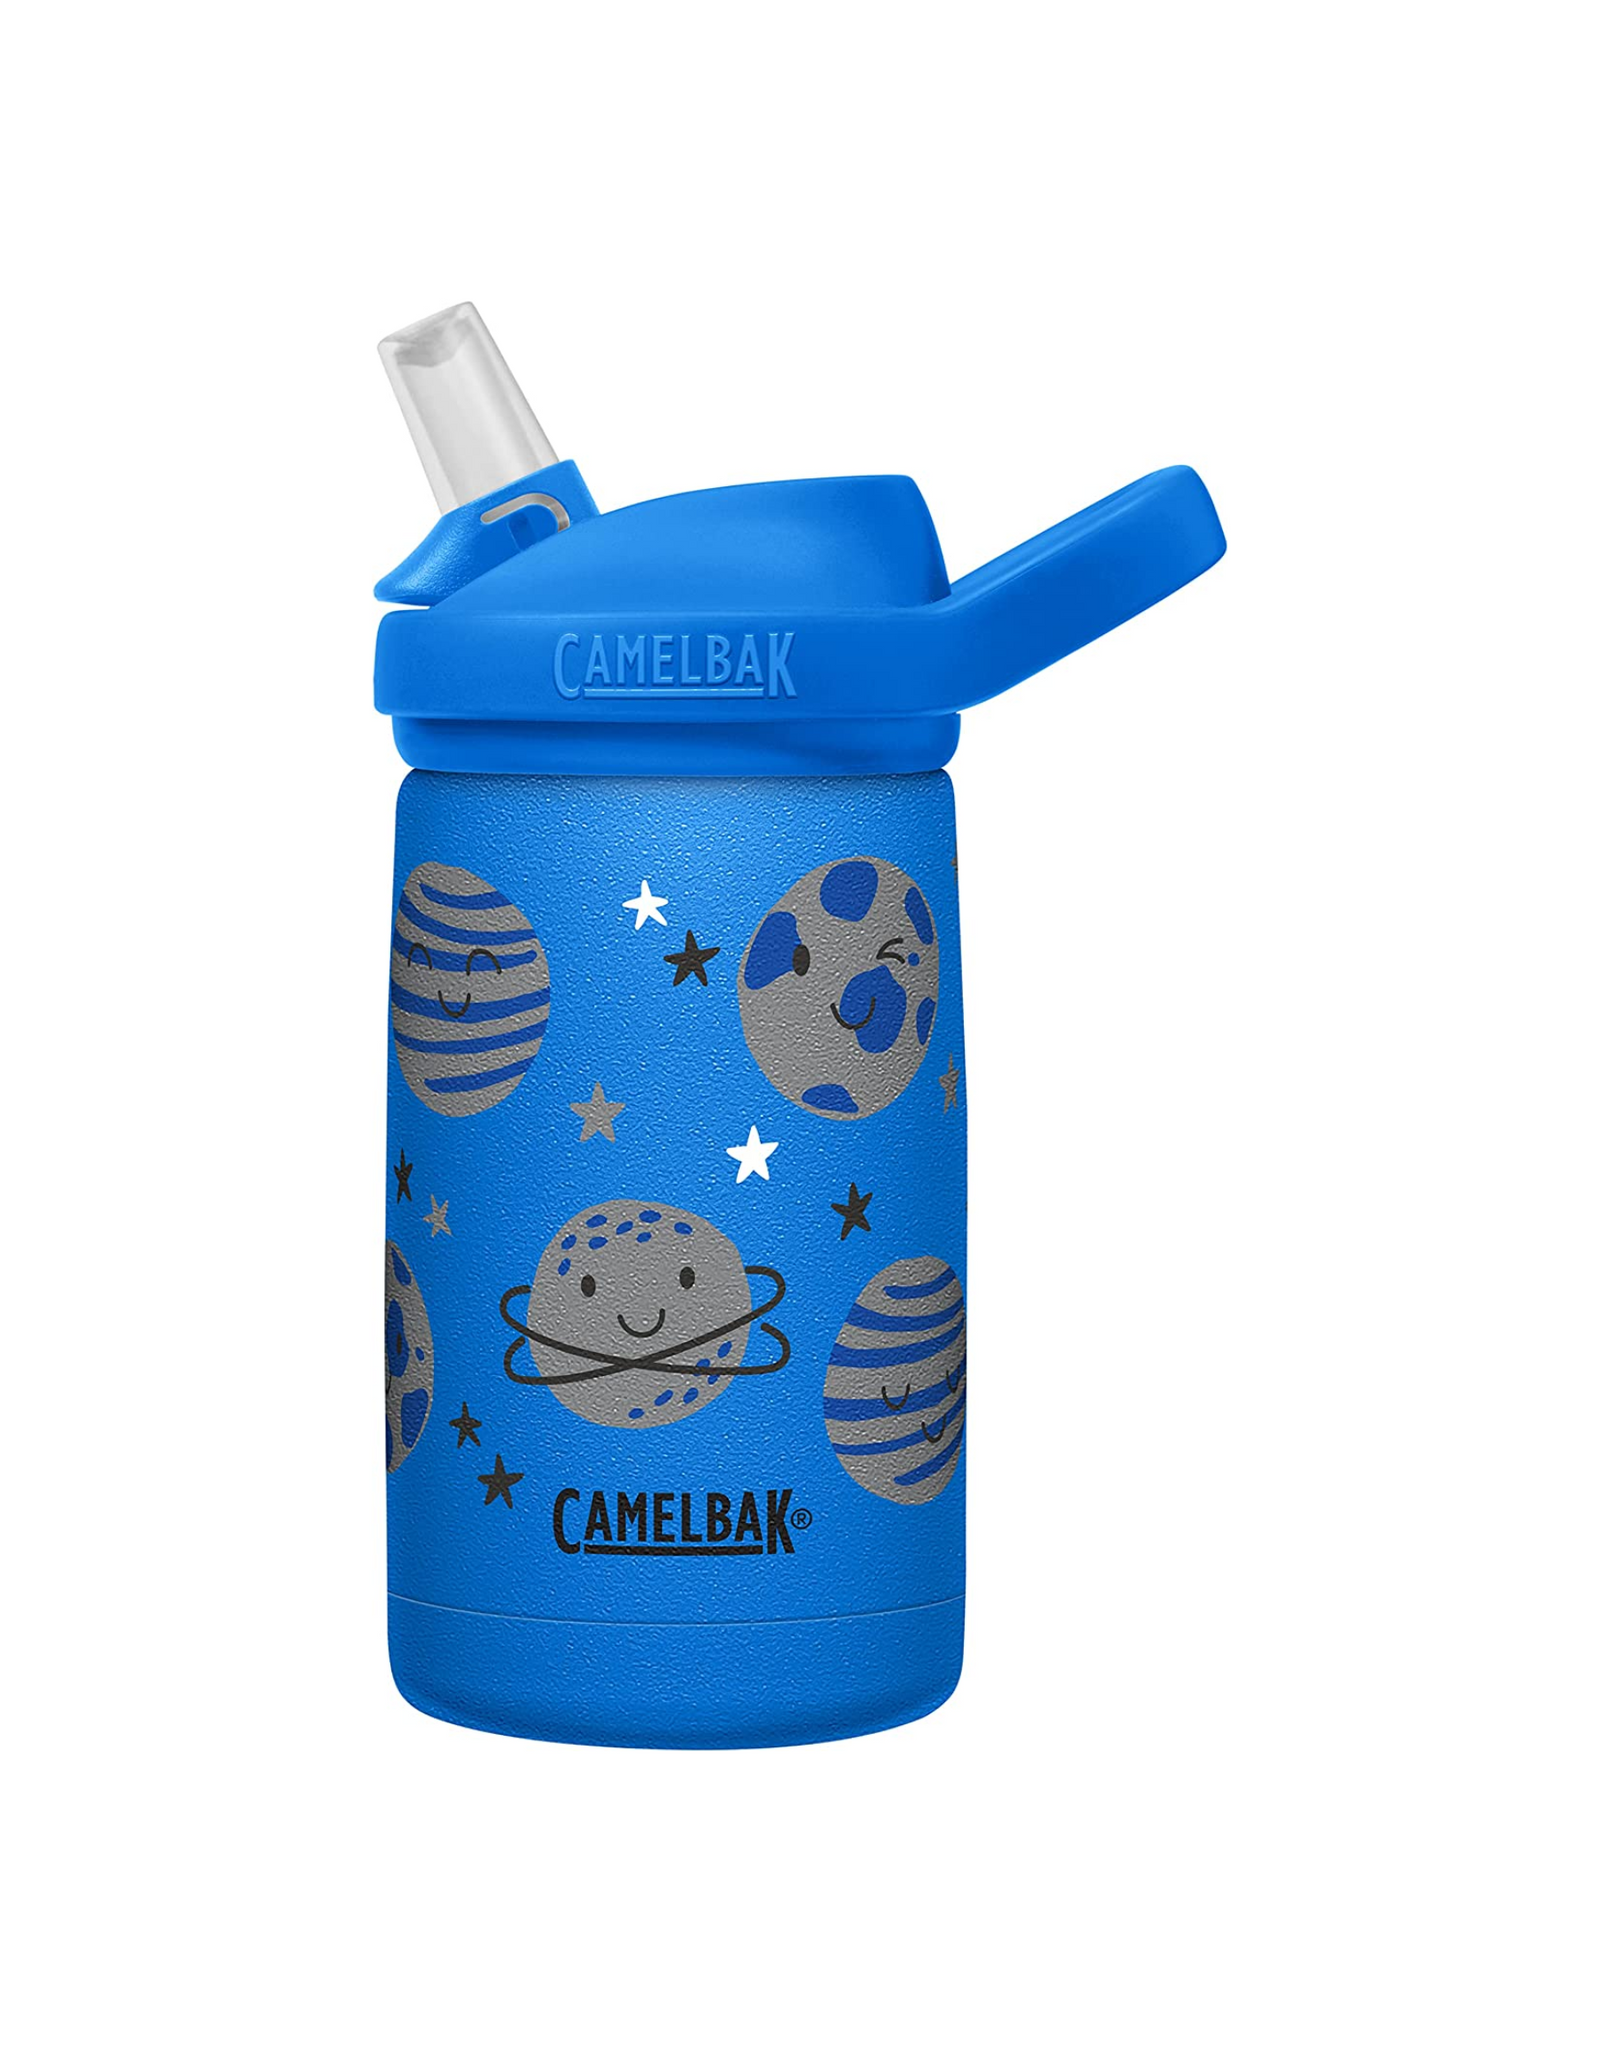 CamelBak Eddy+ Kids Water Bottle, Vacuum Insulated Stainless Steel, 12 oz, Space Smiles